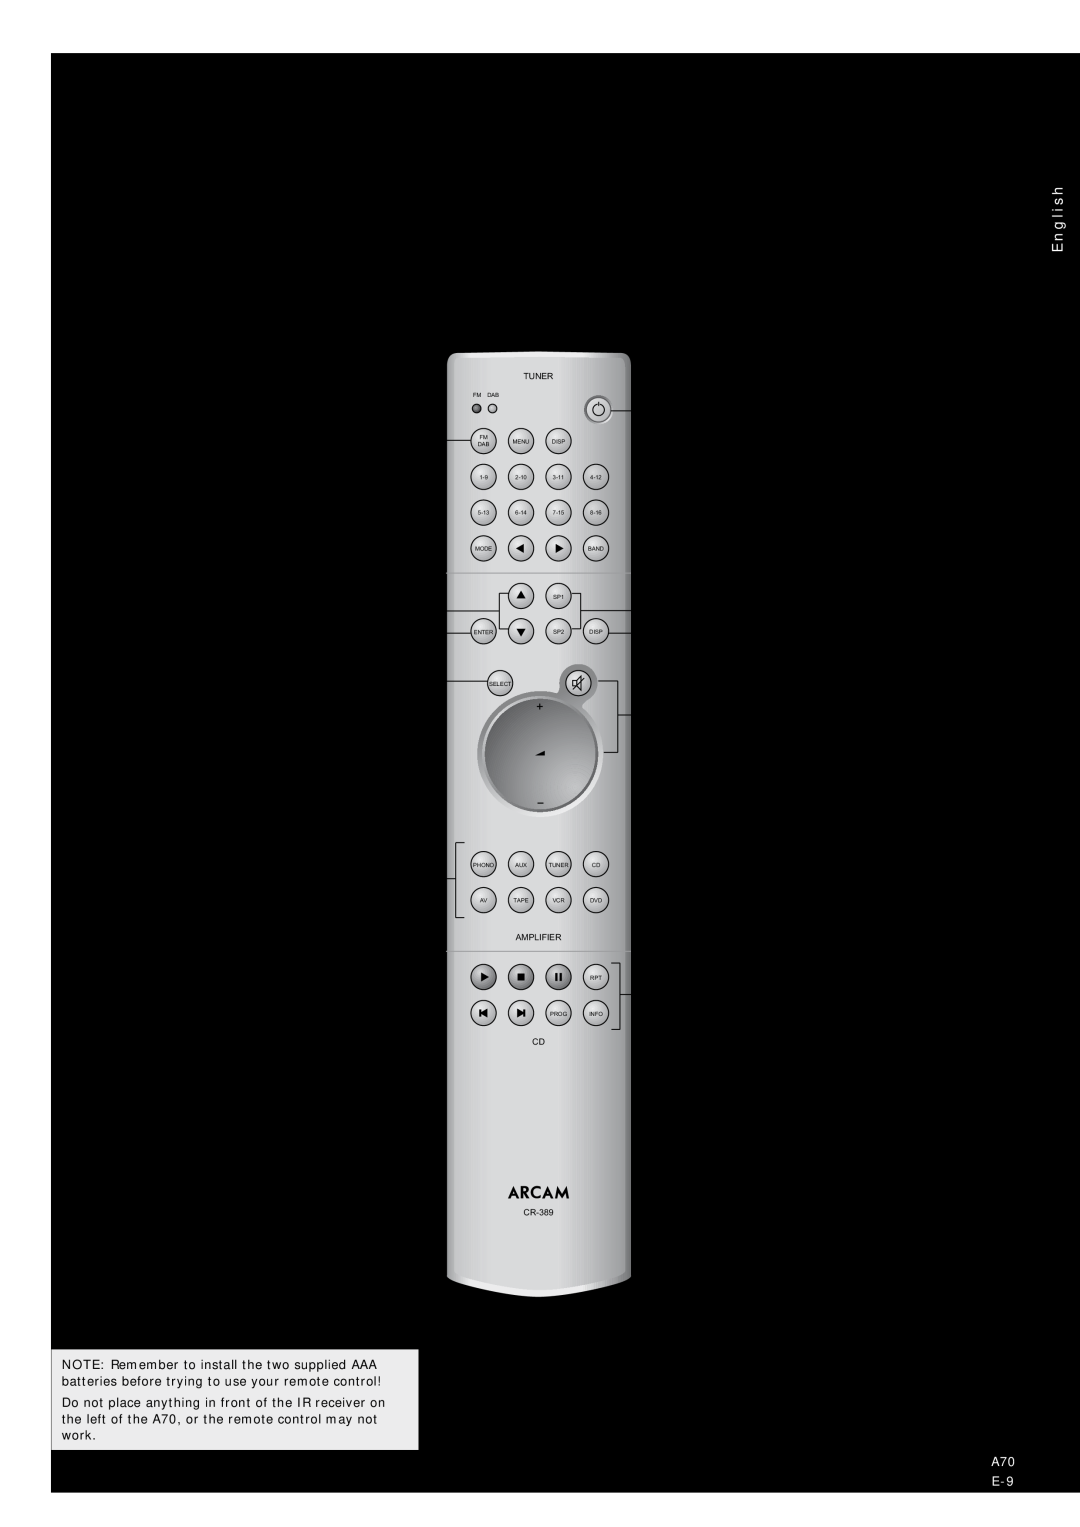 Arcam A70 Using the remote control, CR-389Remote Control, Tuner, Power/Standby, UP and DOWN, Enter, DISP display, Select 